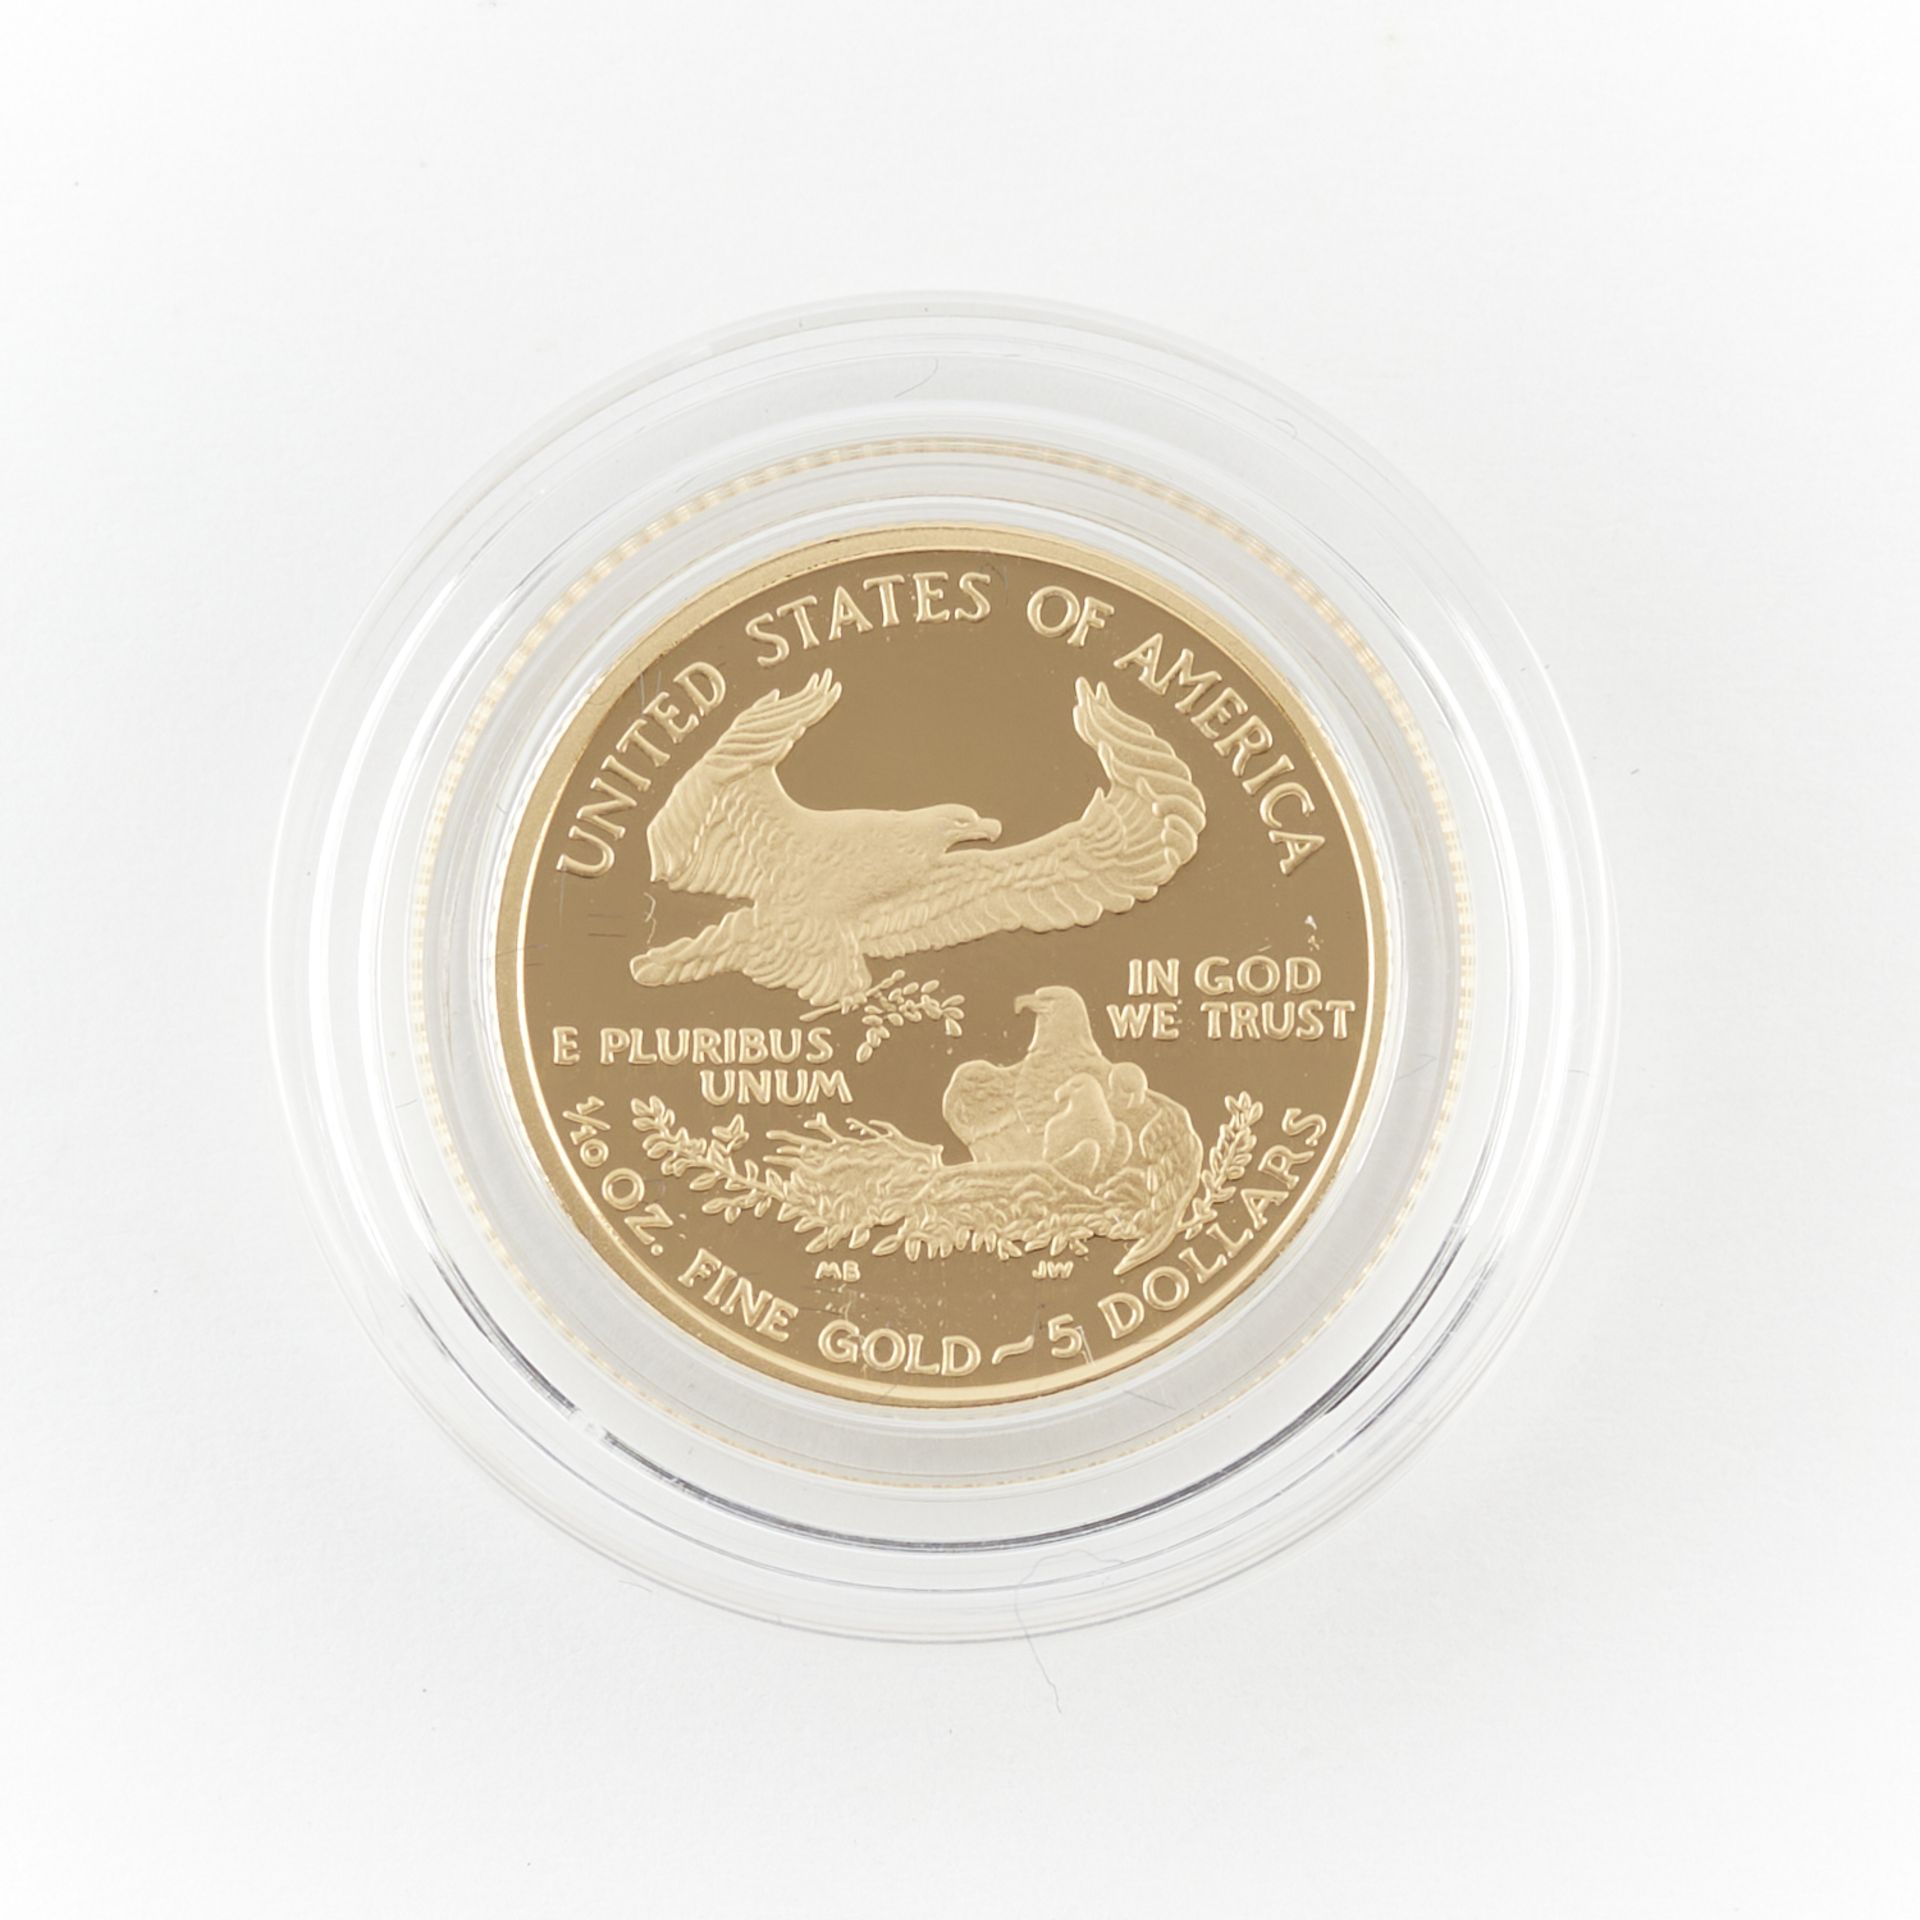 2005 $5 Gold American Eagle Proof Coin - Image 2 of 3